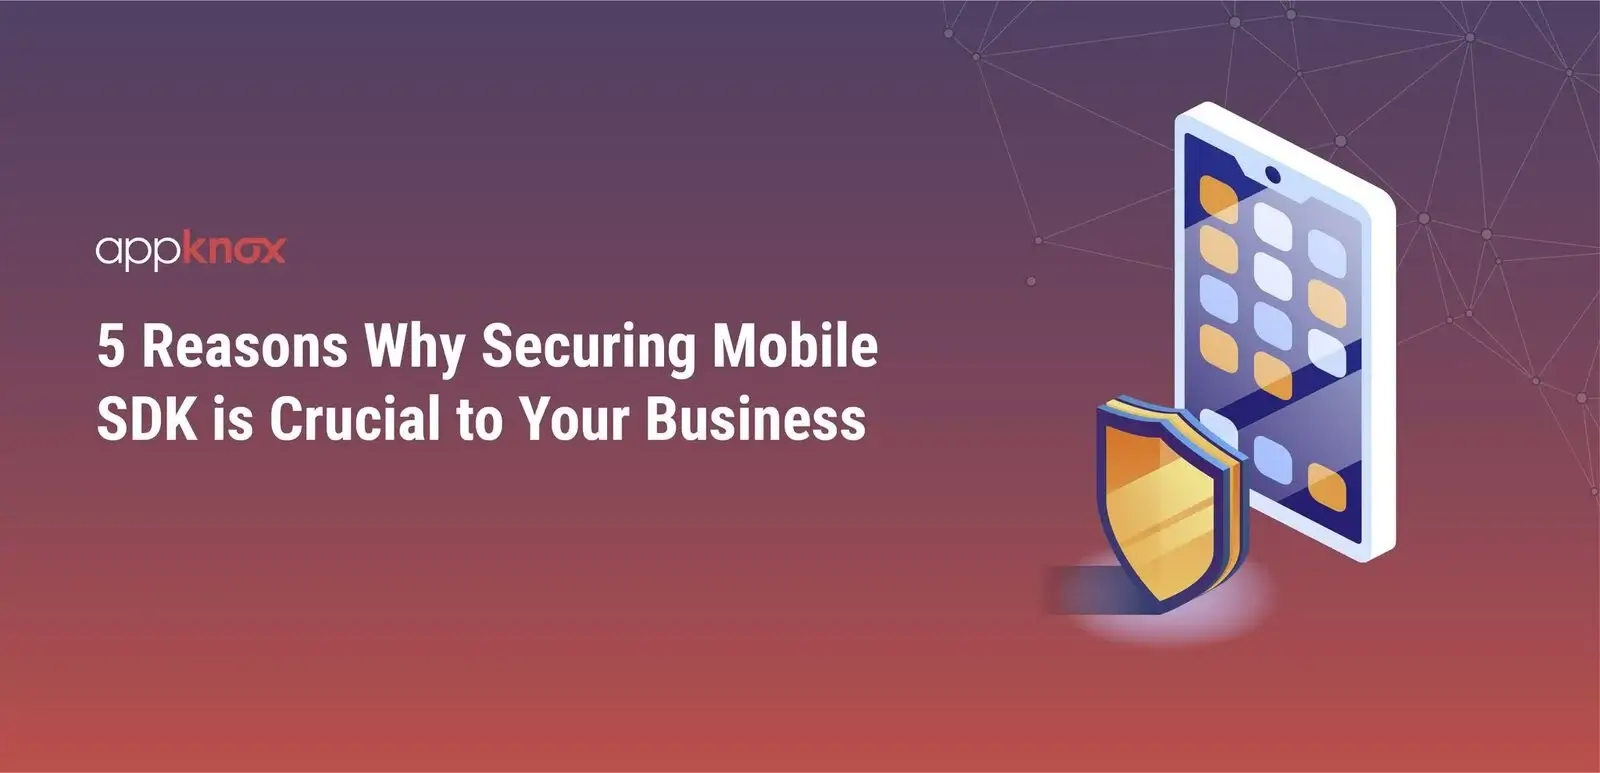 5 Reasons Why Securing Mobile SDK is Crucial to Your Business